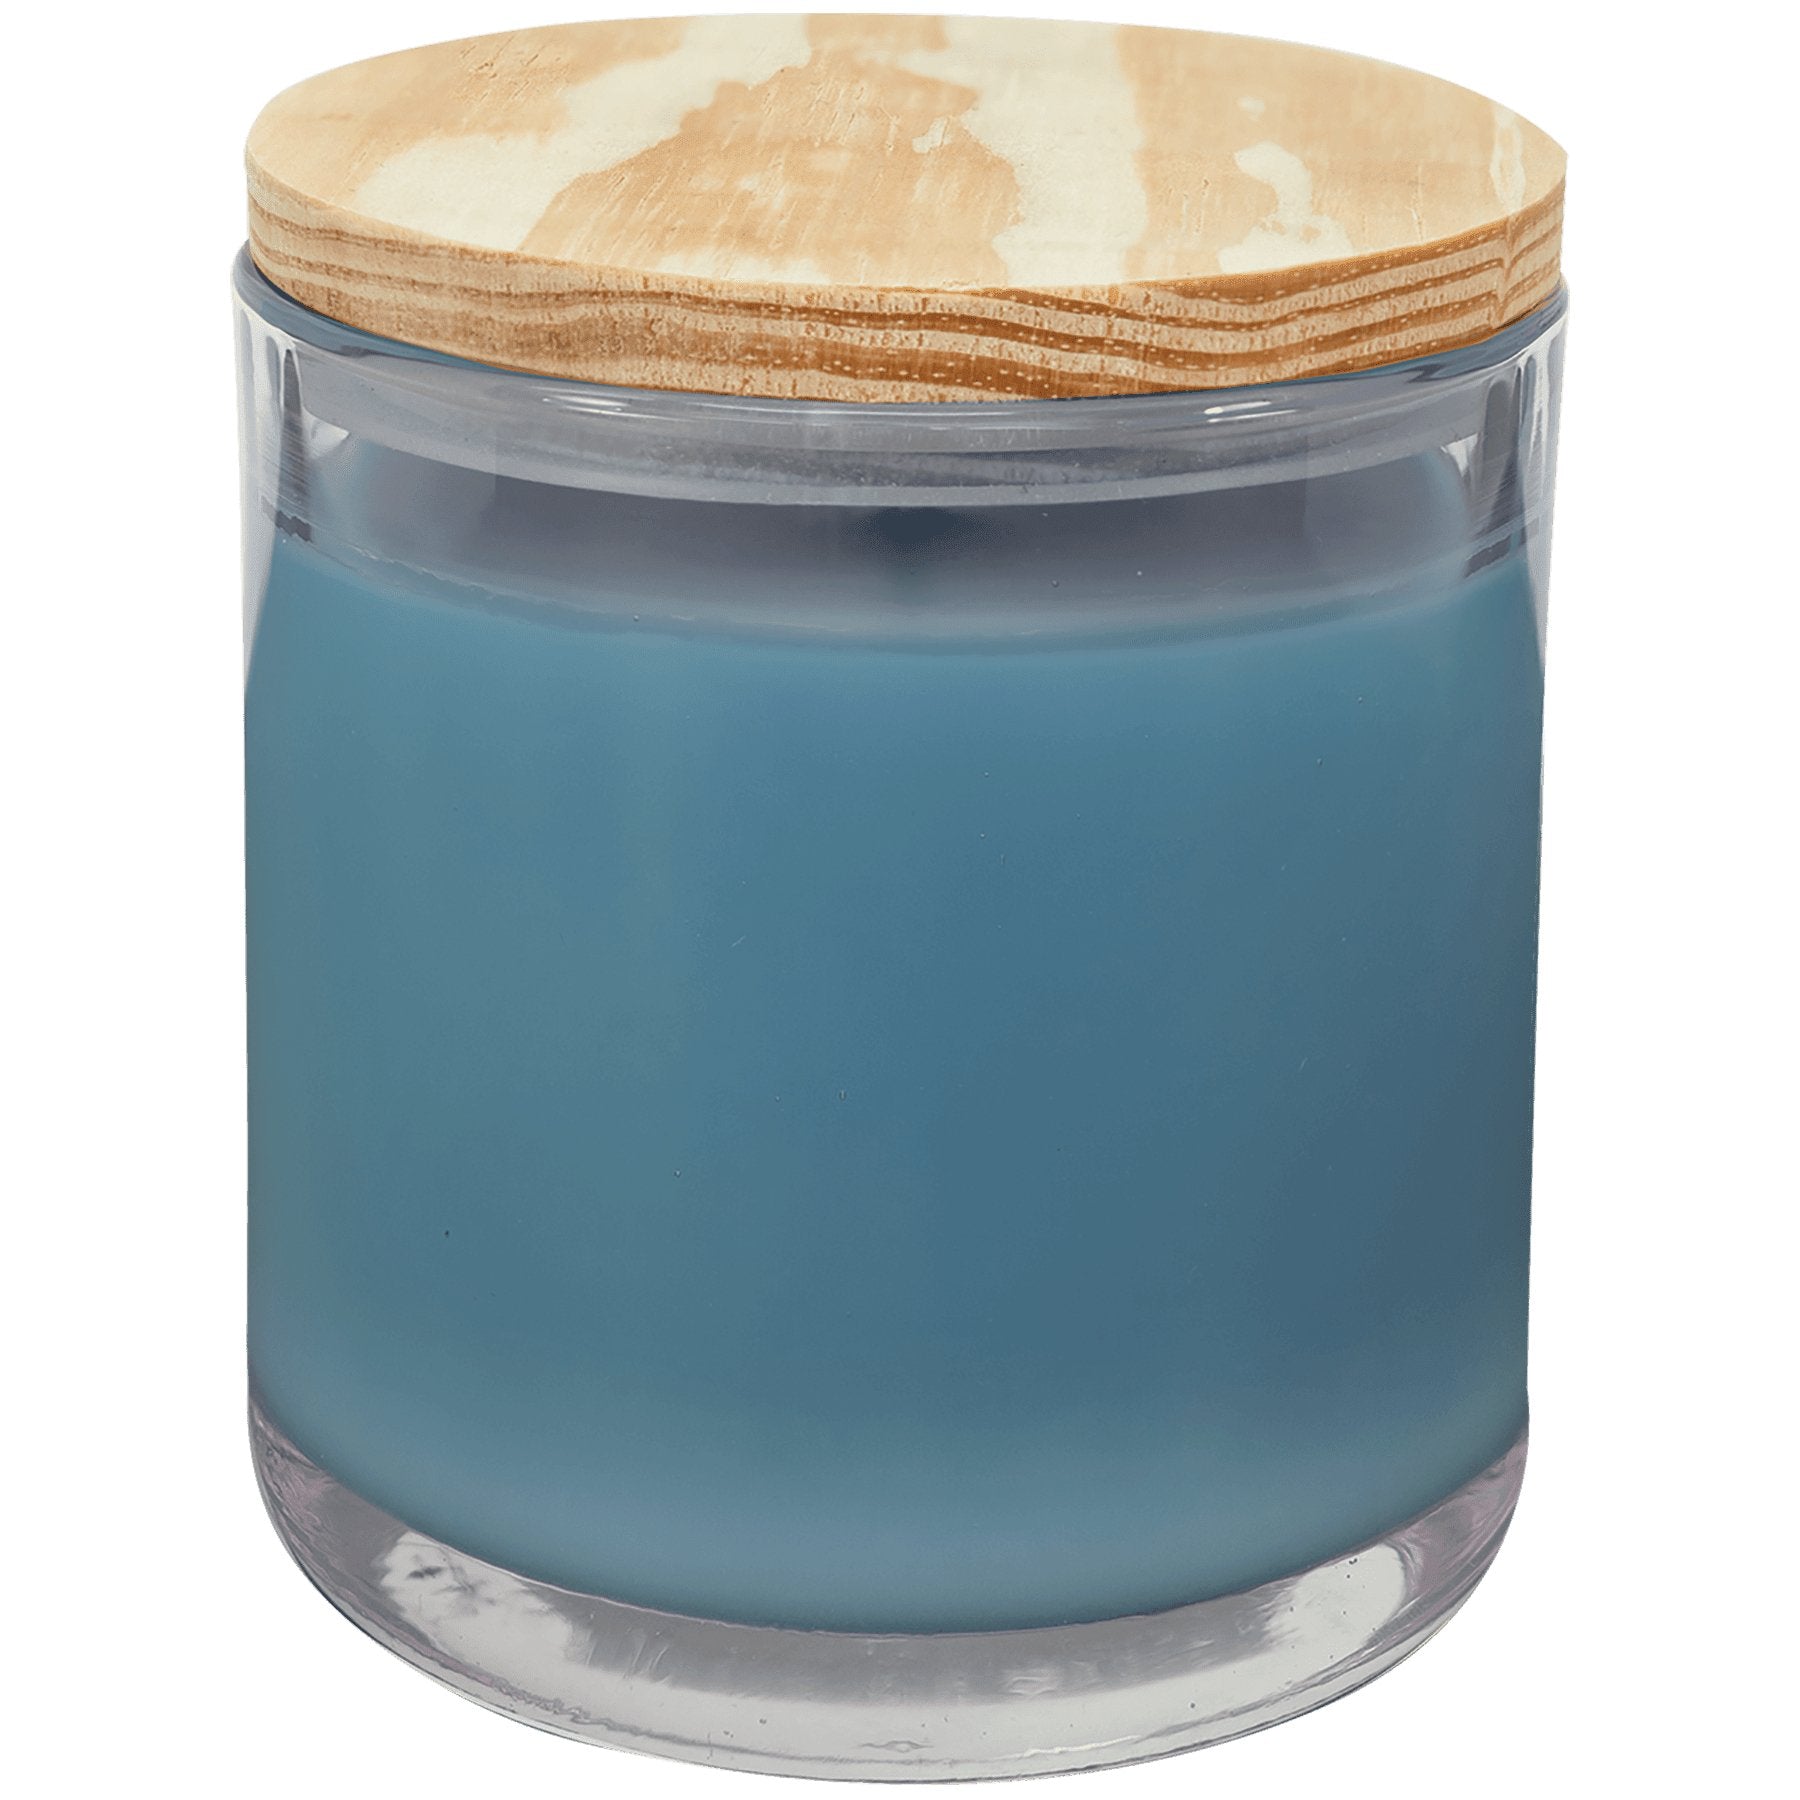 Customizable Scented Candle in a Glass Holder with Wood Lid - Legacy Creator IncFrench Linen